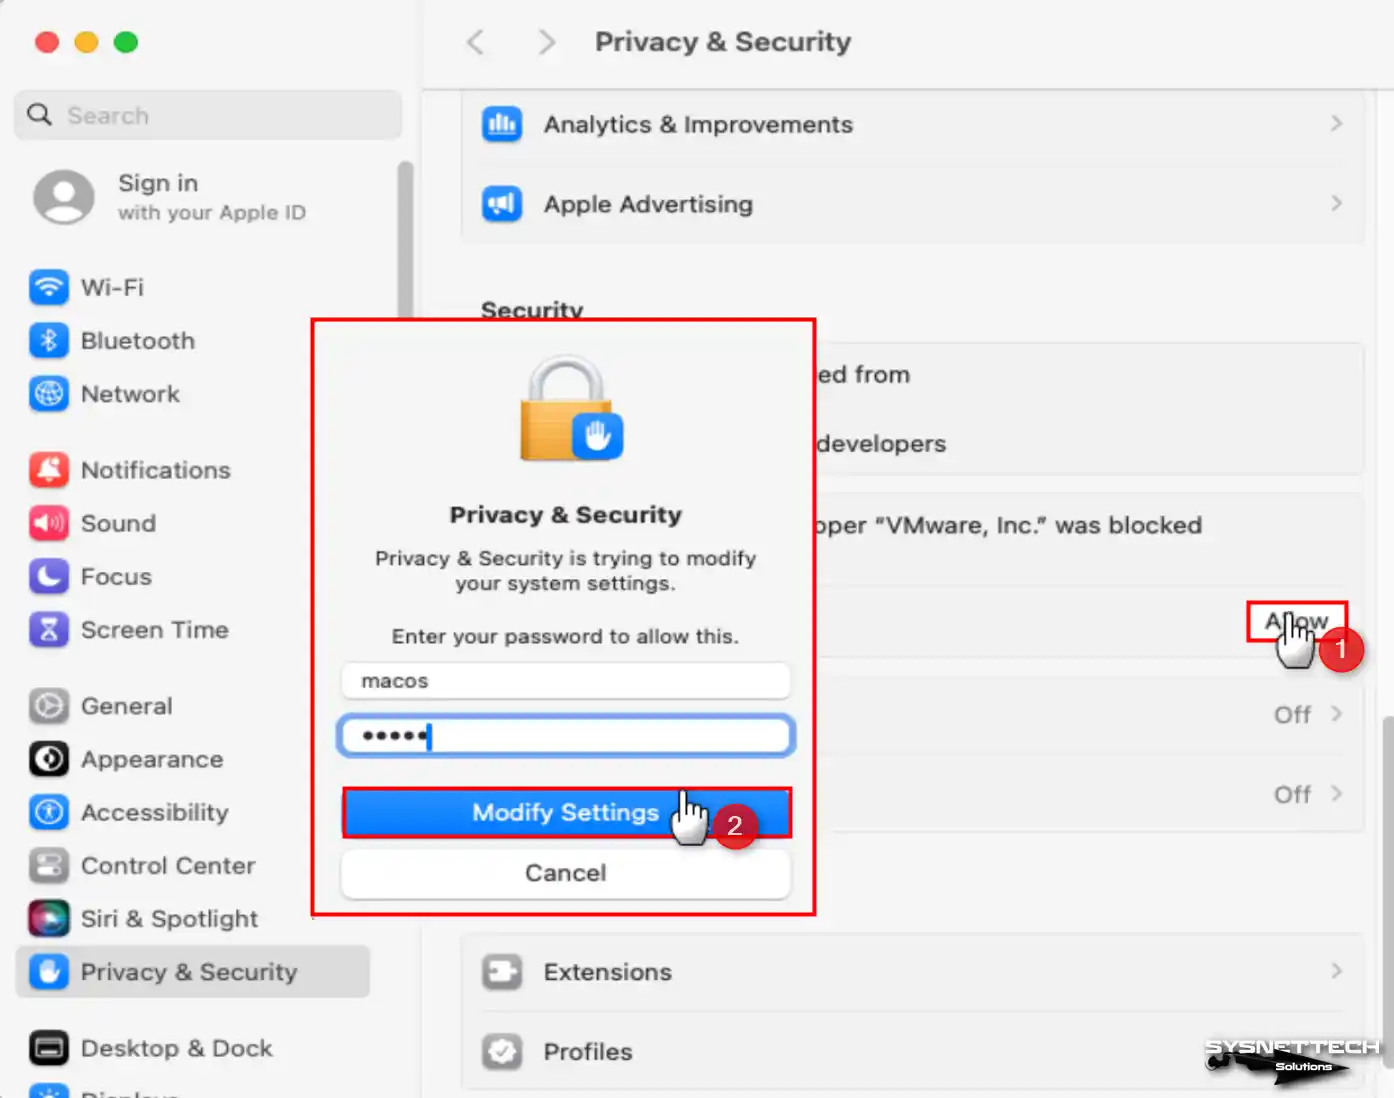 Unlock and Allow VMware Inc to Modify Security and Privacy Settings